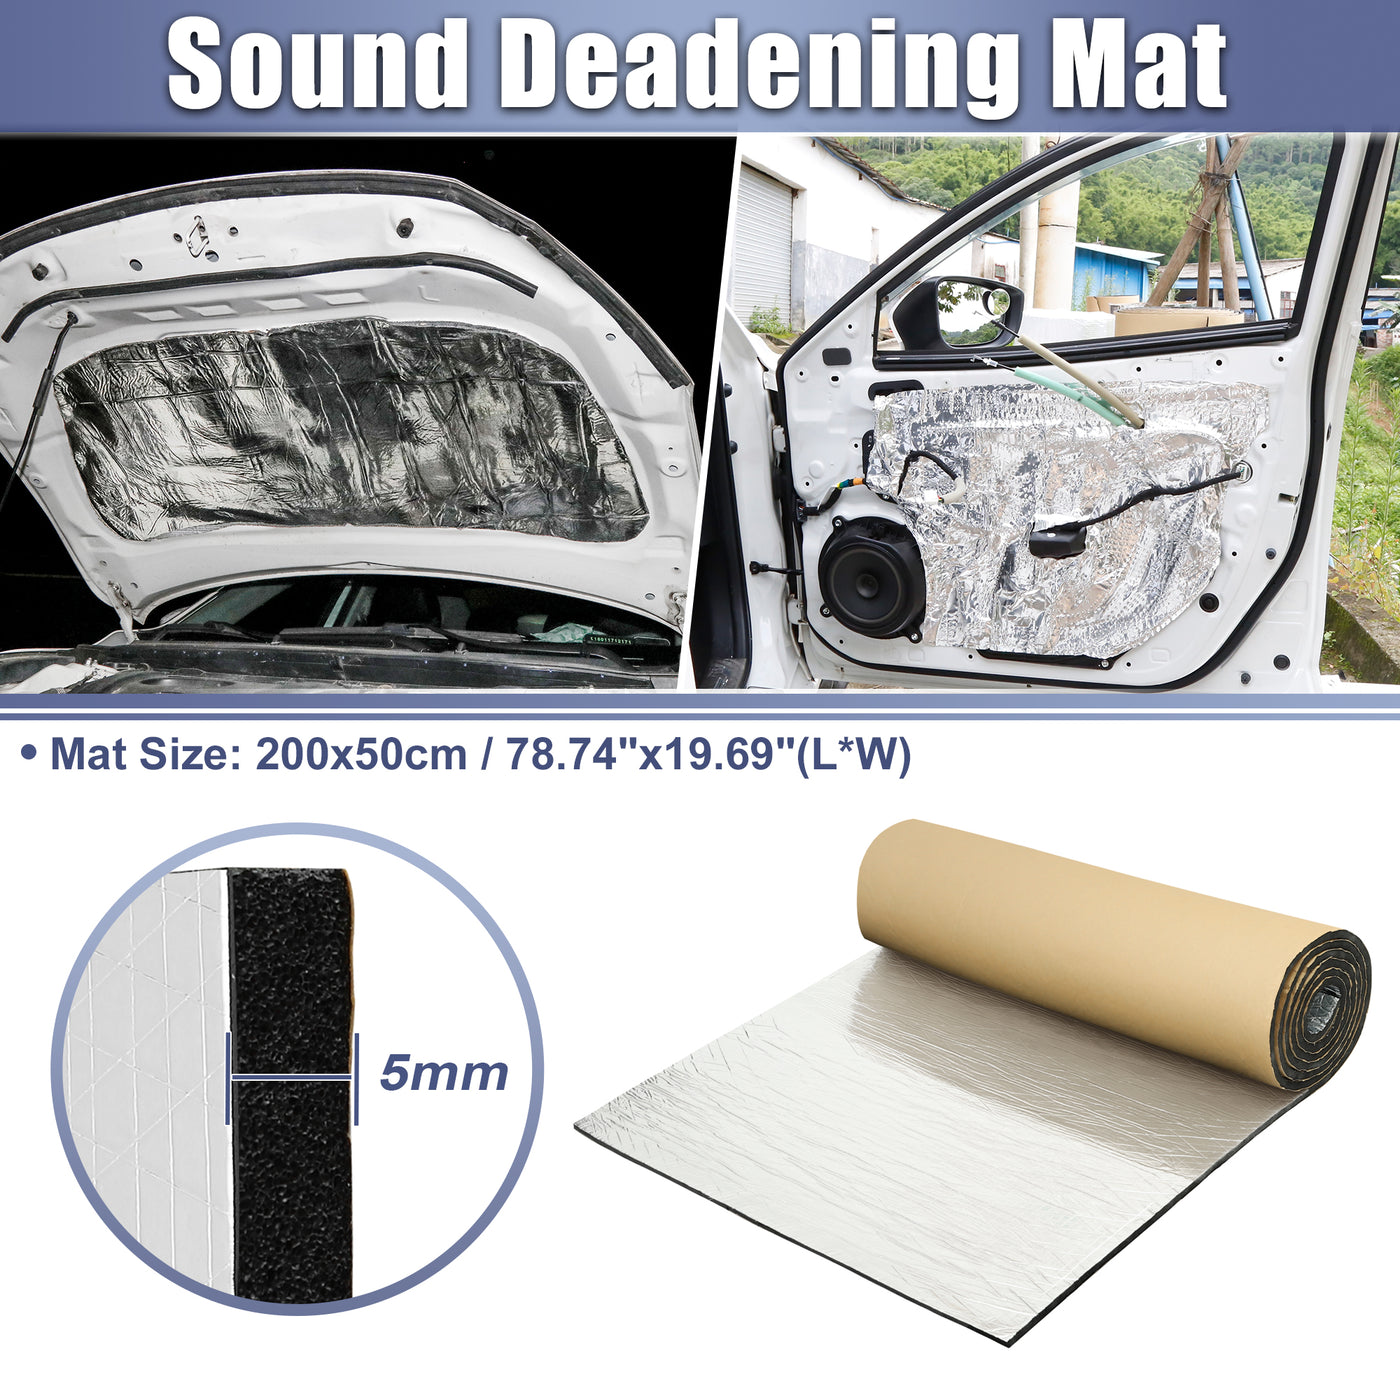 X AUTOHAUX 197mil 5mm 10.76sqft Car Sound Deadening Mat Aluminum Foil Closed Cell Foam Heat Shield Material Damping Self Adhesive Universal for Hood Fender and Boat Engine Cover 78.74"x19.69"